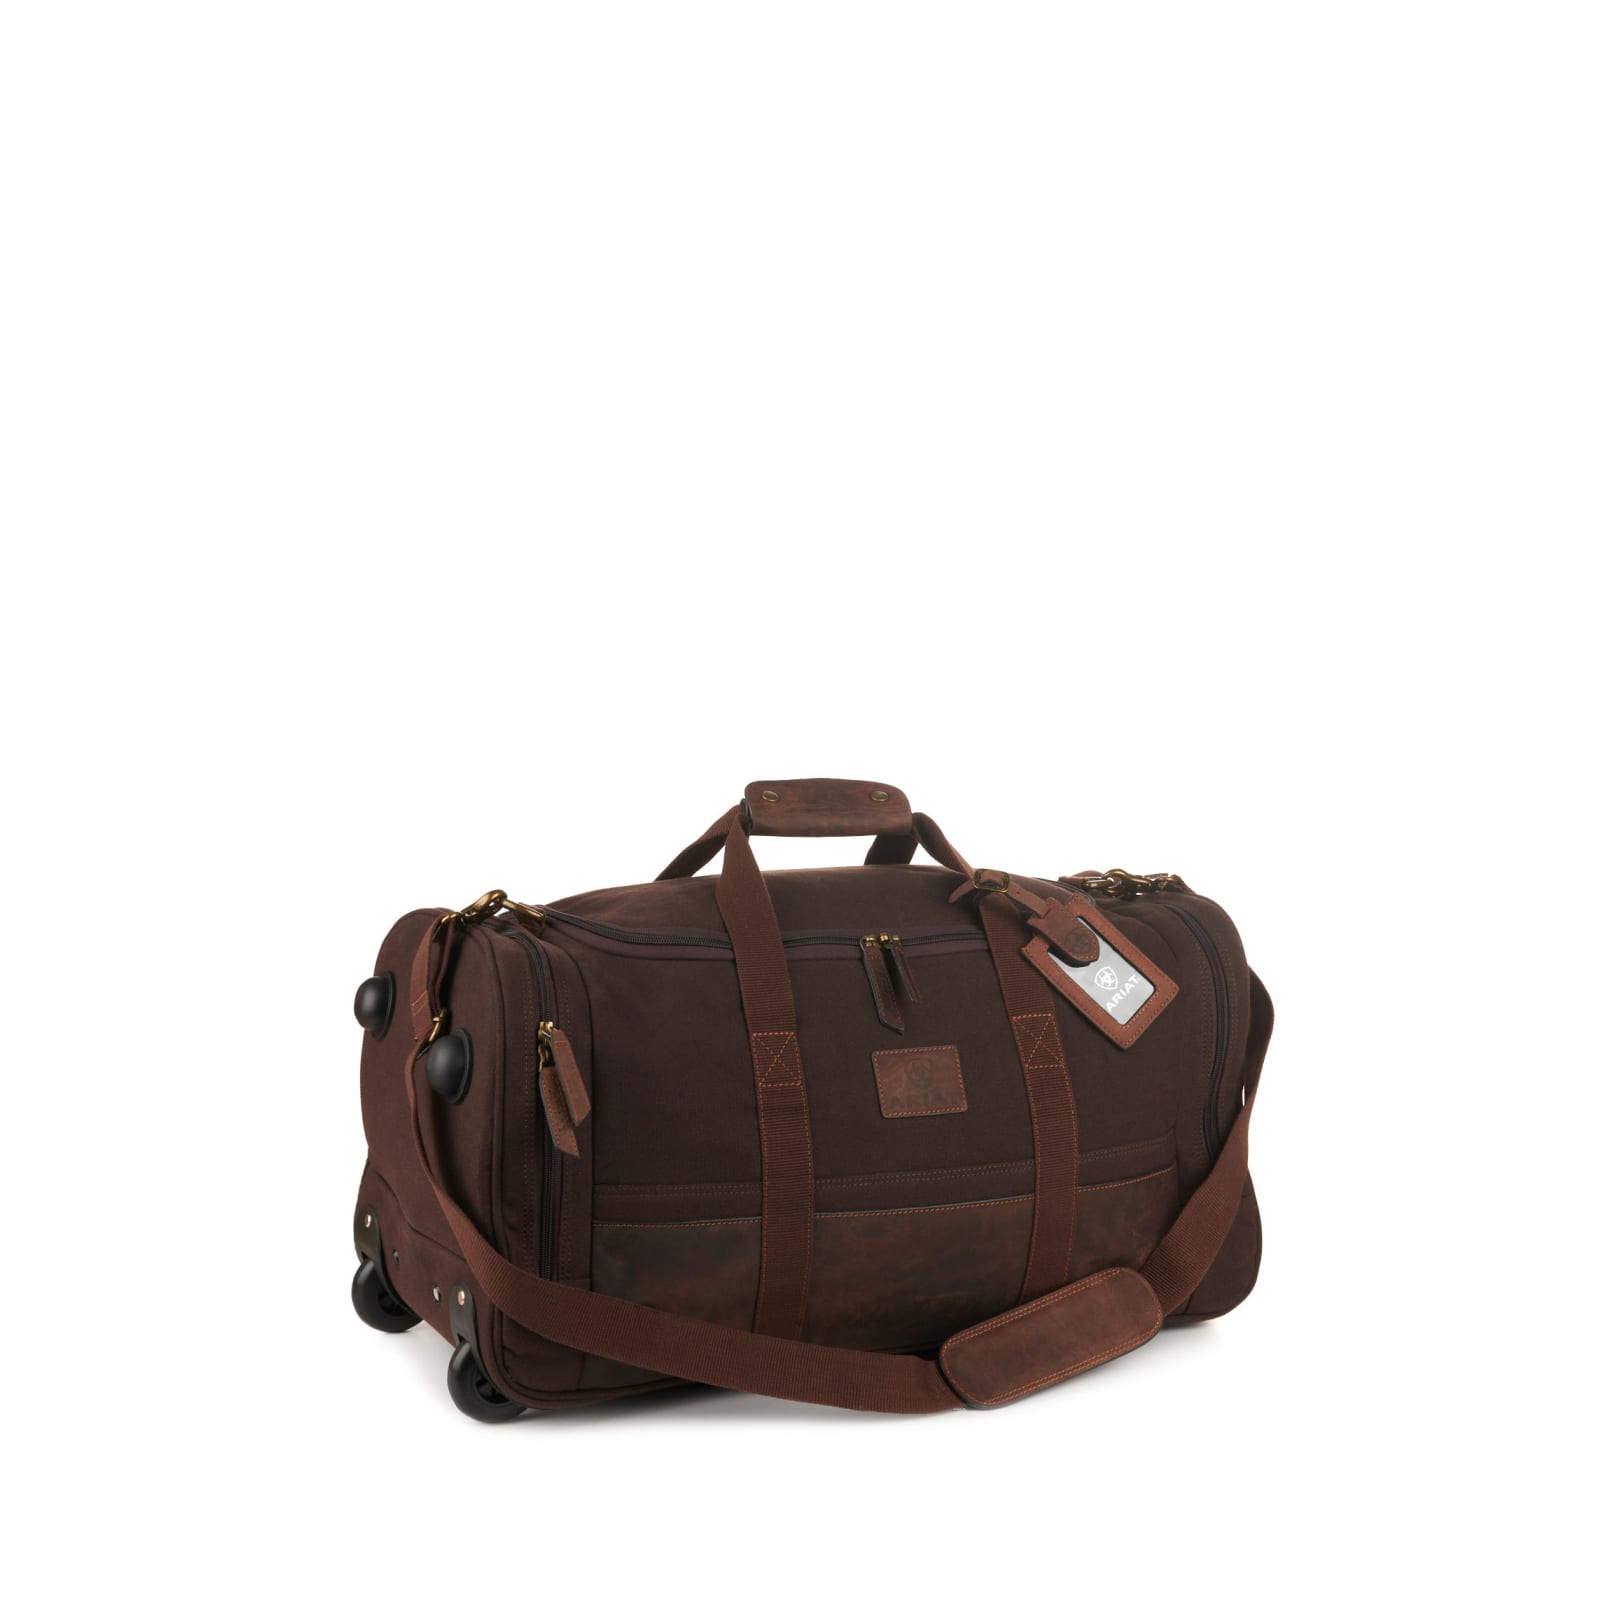 Ariat Dark Brown Canvas and Leather Rolling Duffle Bag